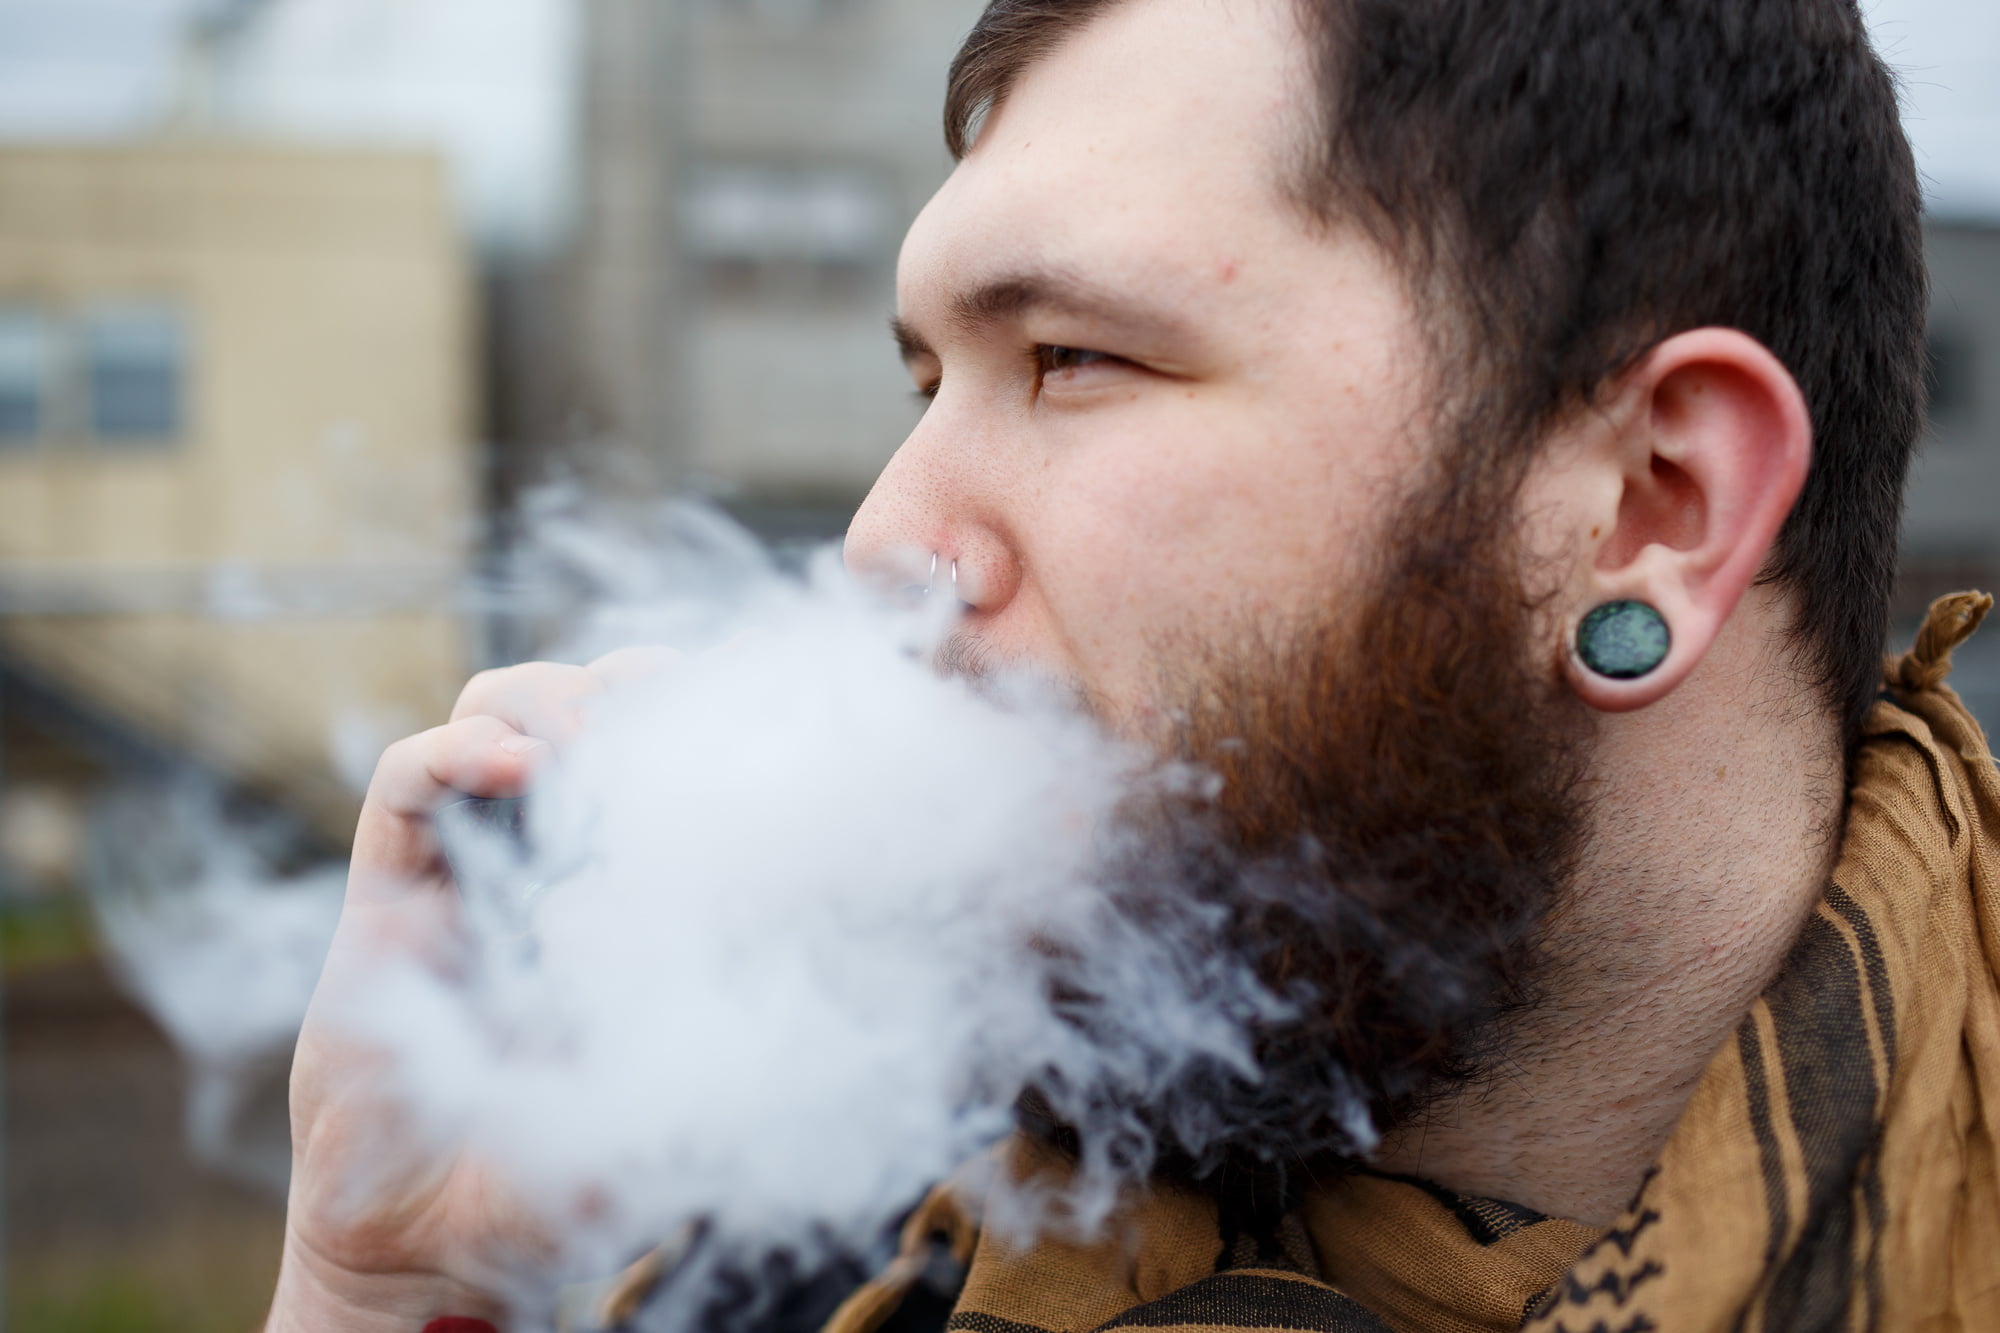 What is a vape atomizer, you might ask? Learn more for yourself about the functions and purpose of a vape atomizer here.